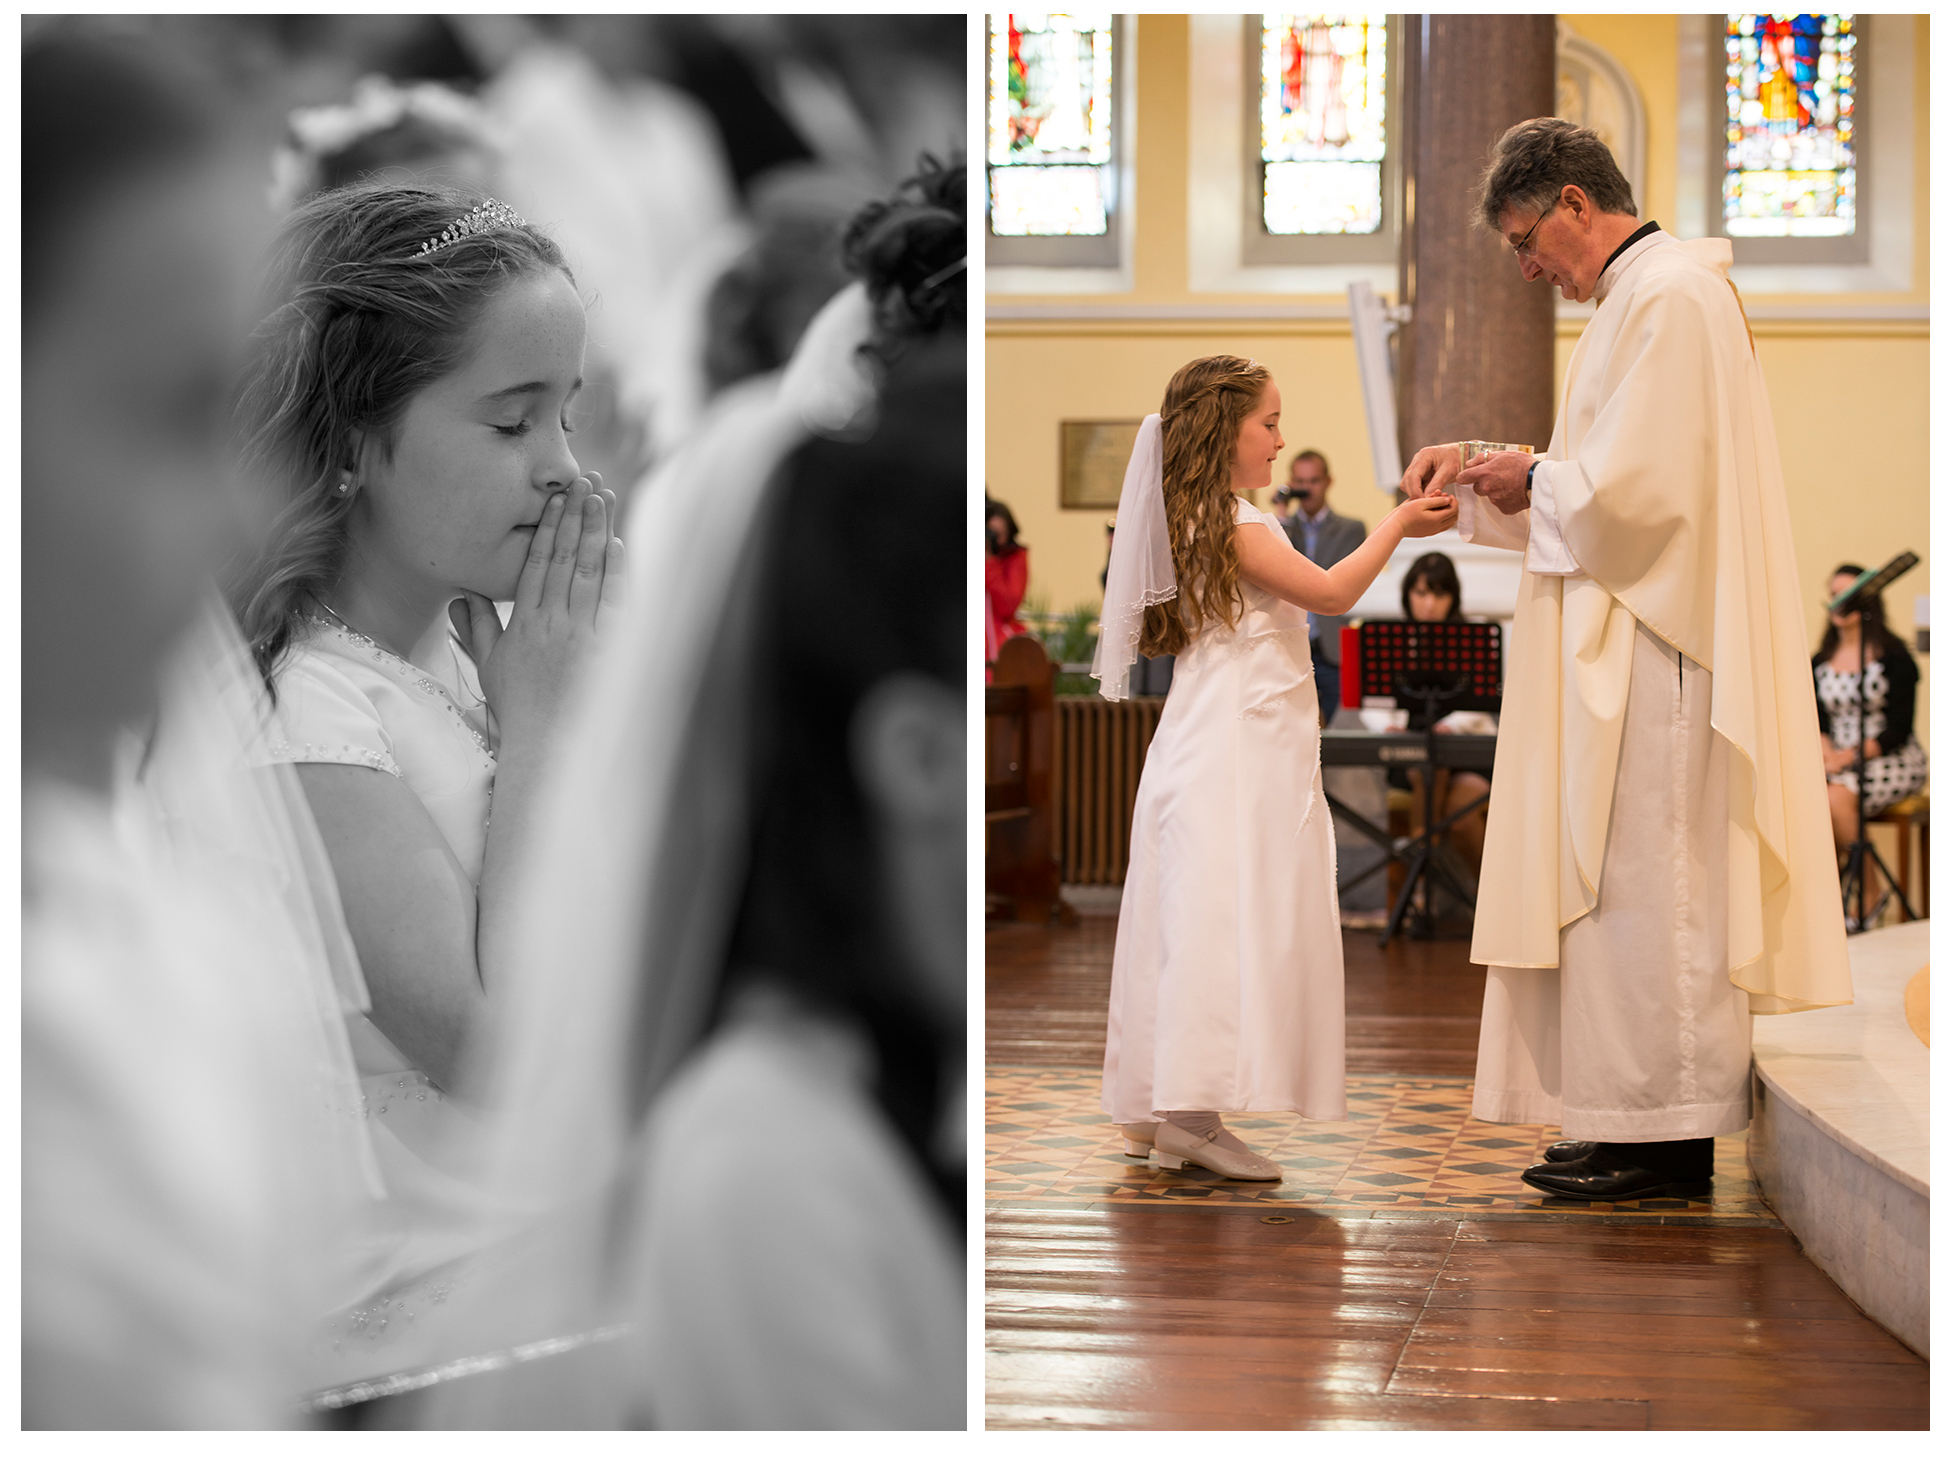 photographer in the church photographing first holy communion, communion girl